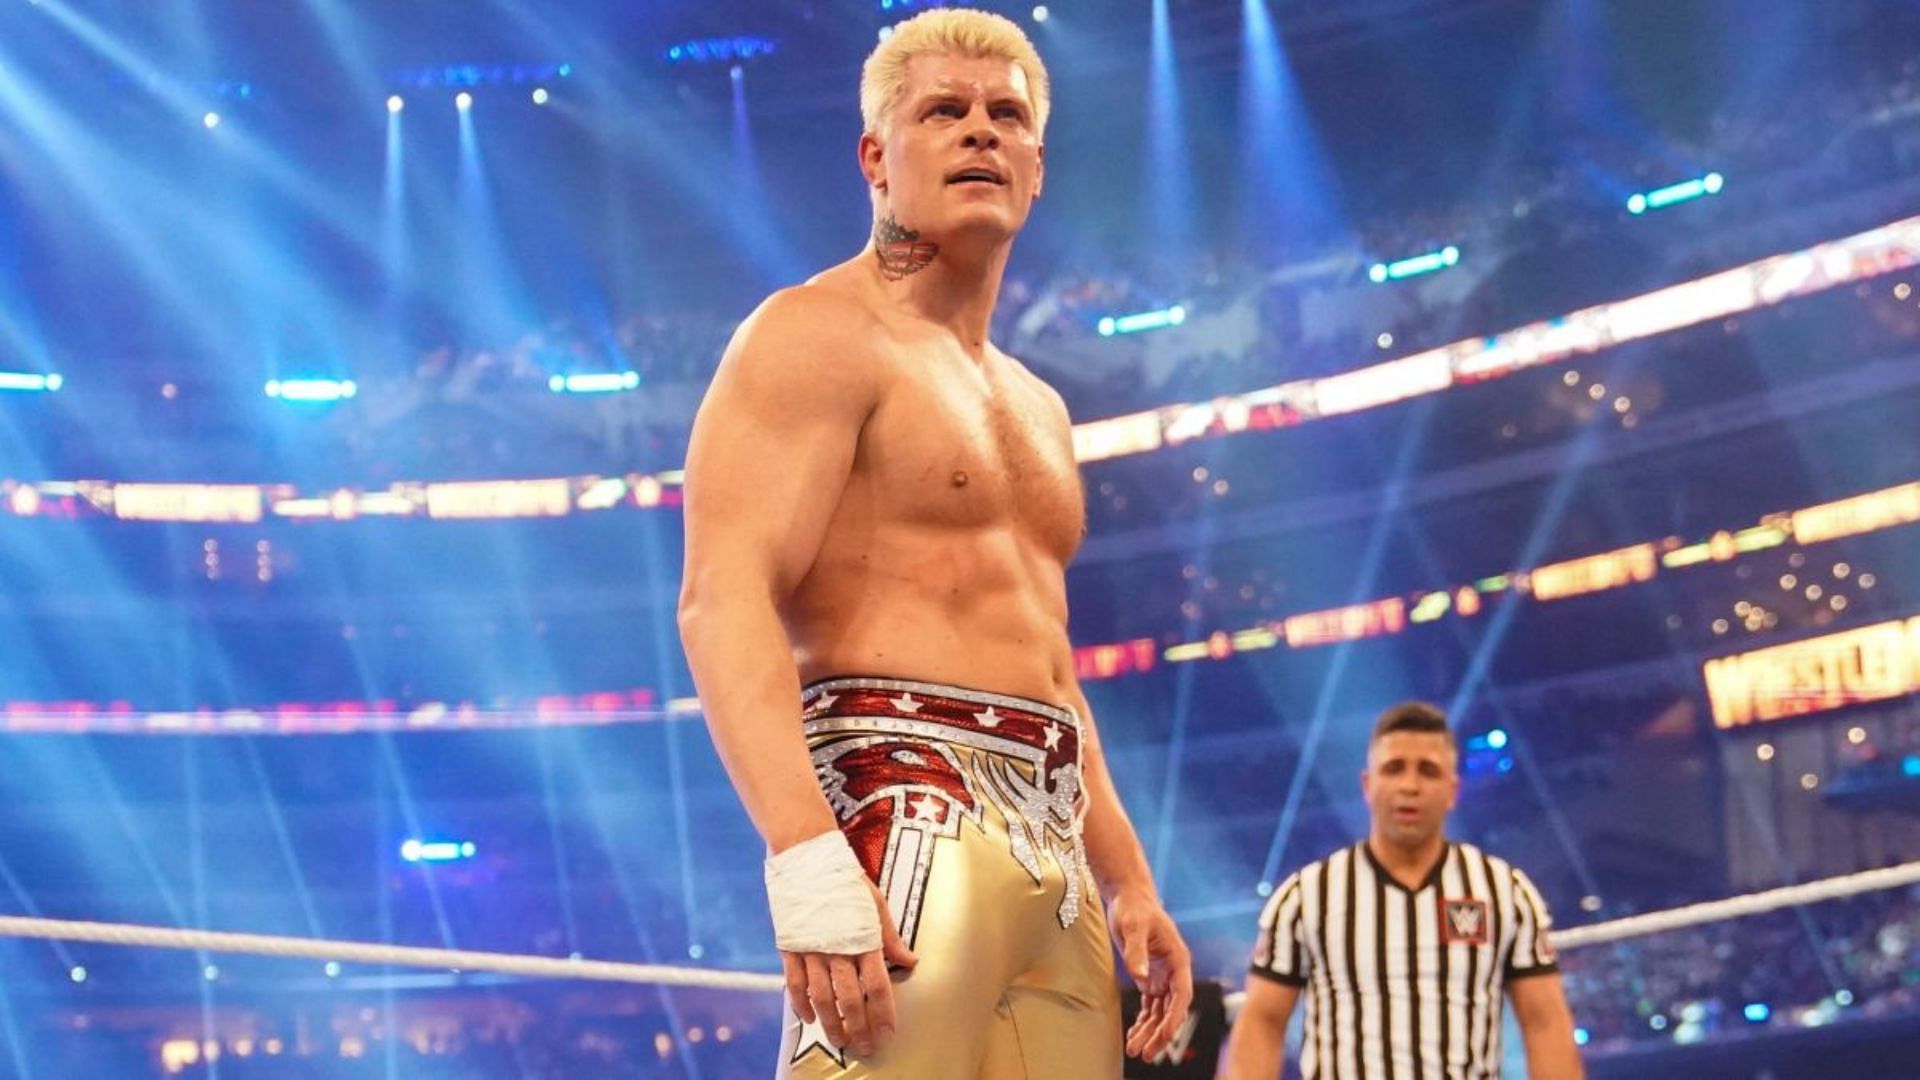 Cody Rhodes during a match. Image Credits: wwe.com 